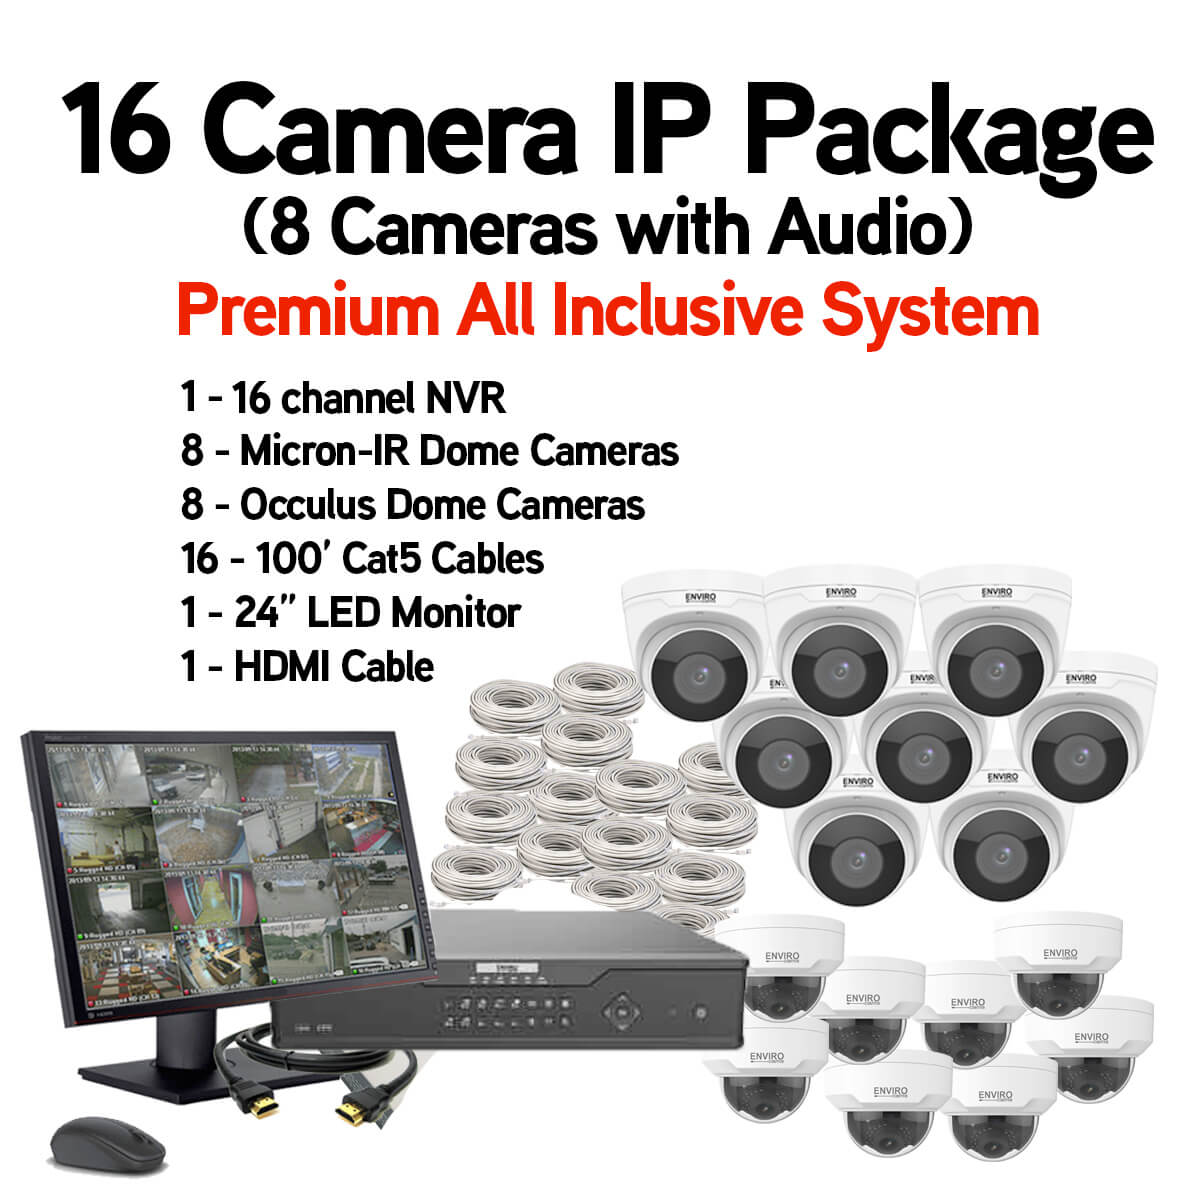 16 Camera IP Package with 8 Audio | EnviroCams